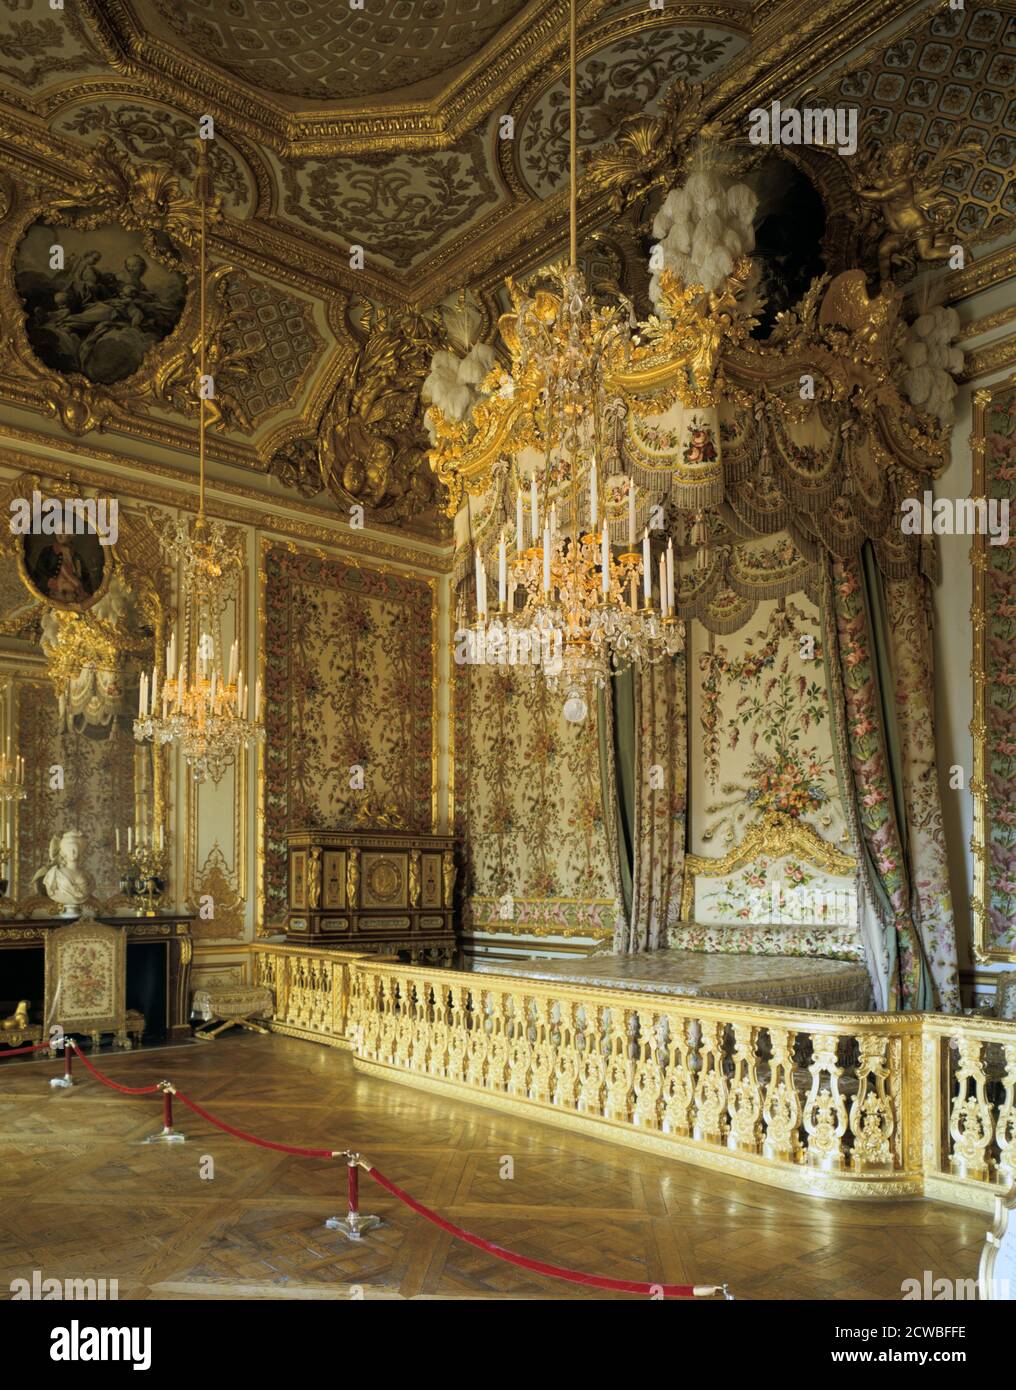 The Queen's Bedchamber, The Queen's Suite (Grand Apartment de la Reine), Chateau de Versailles, France. The Rococo-style woodwork, as well as the ceiling painting by Francois Boucher (1703-1770) were commissioned around 1730 by Louis XV in order to please his wife, Maria Leszczynska. Marie-Antoinette found this terribly old-fashioned, and decided to replace all the furnishings, notably commissioning silk hangings woven in patterns of lilacs and peacock feathers, garnishing the alcove and the enormous four-poster bed (restored in 1976). Stock Photo